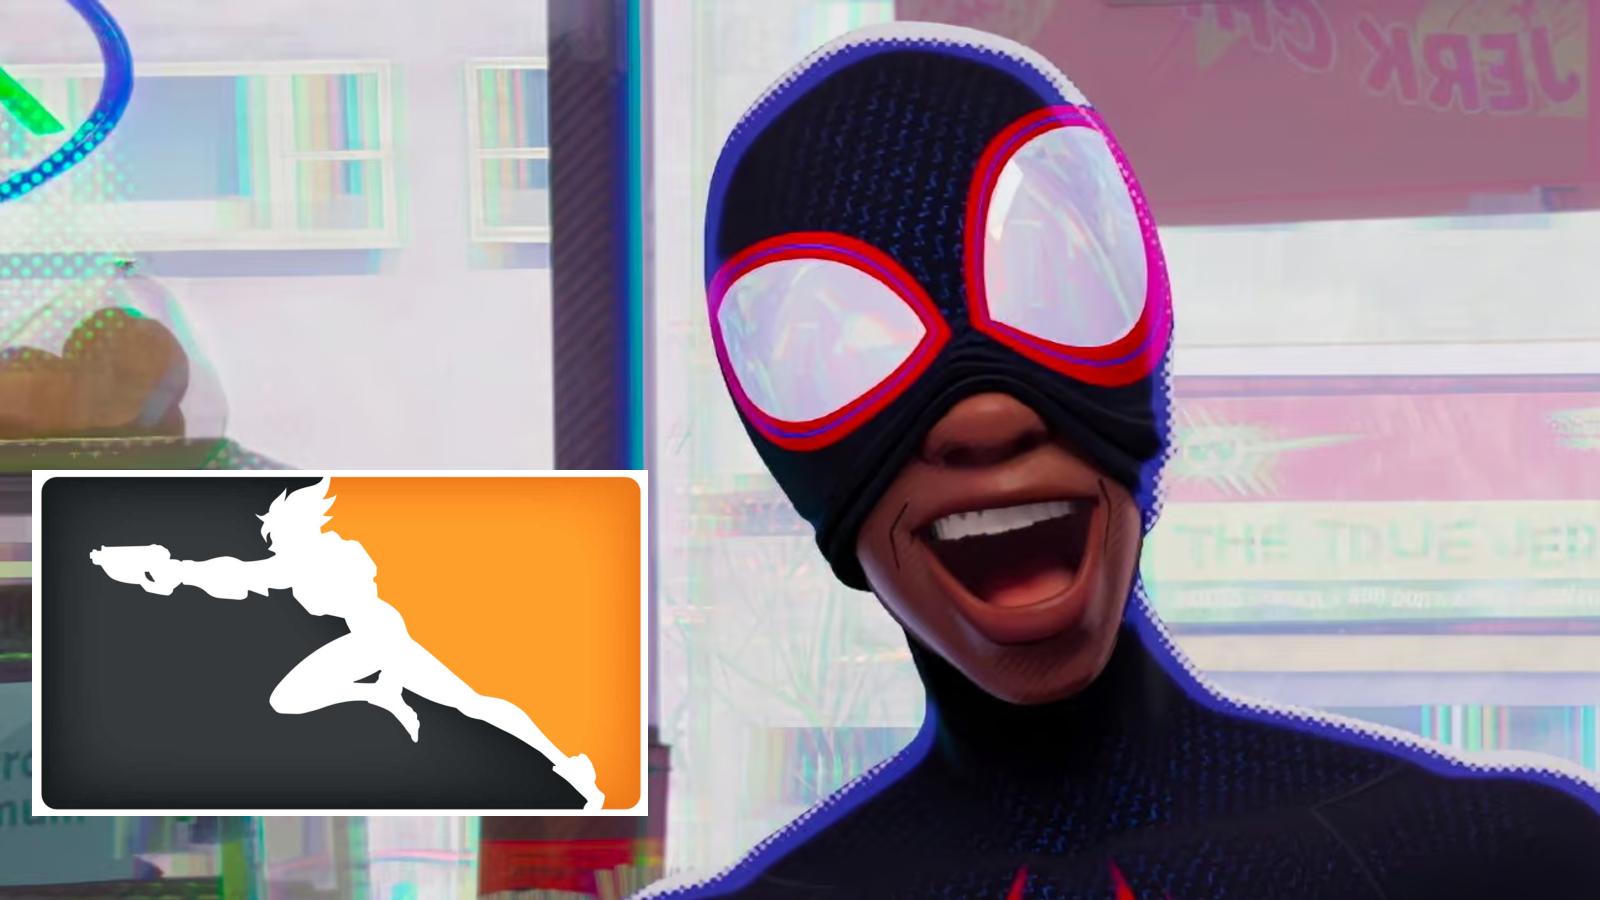 Miles Morales and the Overwatch League logo